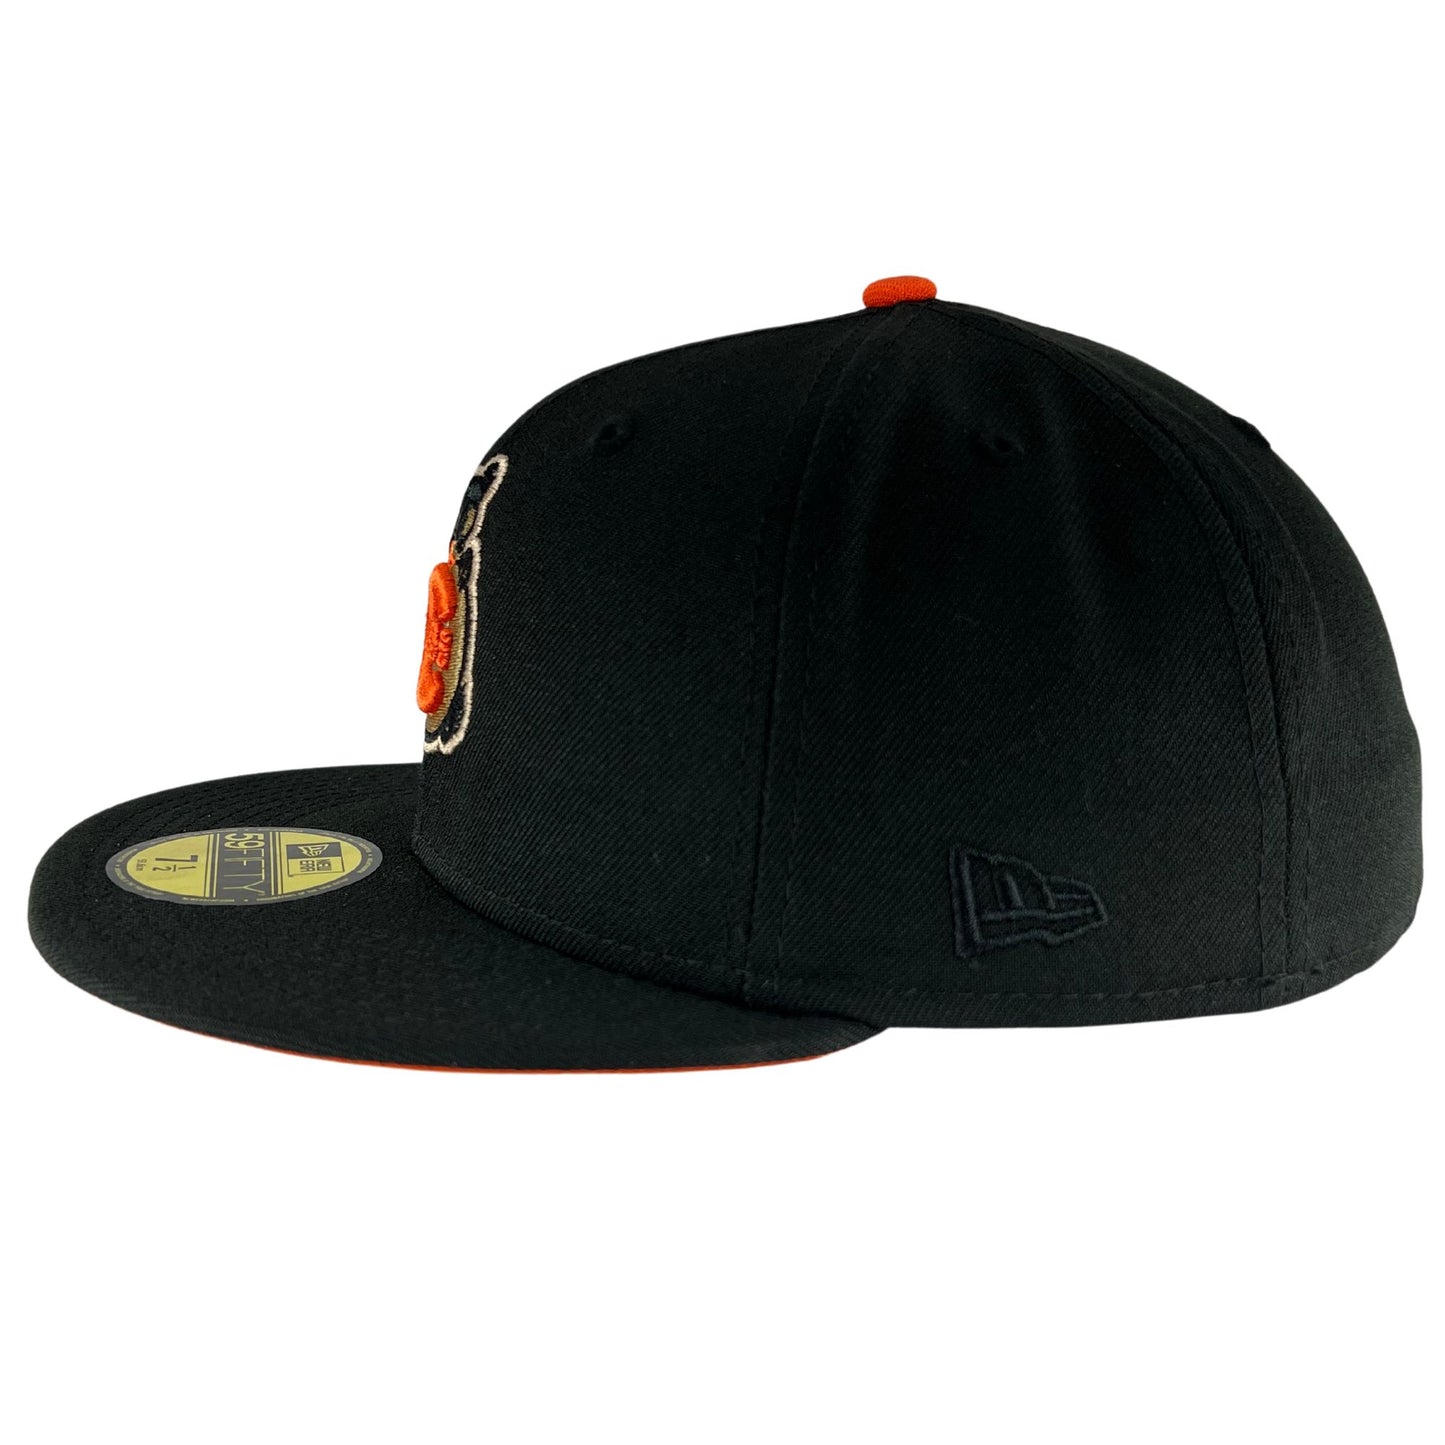 Chicago Cubs Black Orange 1990 ASG New Era 59FIFTY Fitted Hat